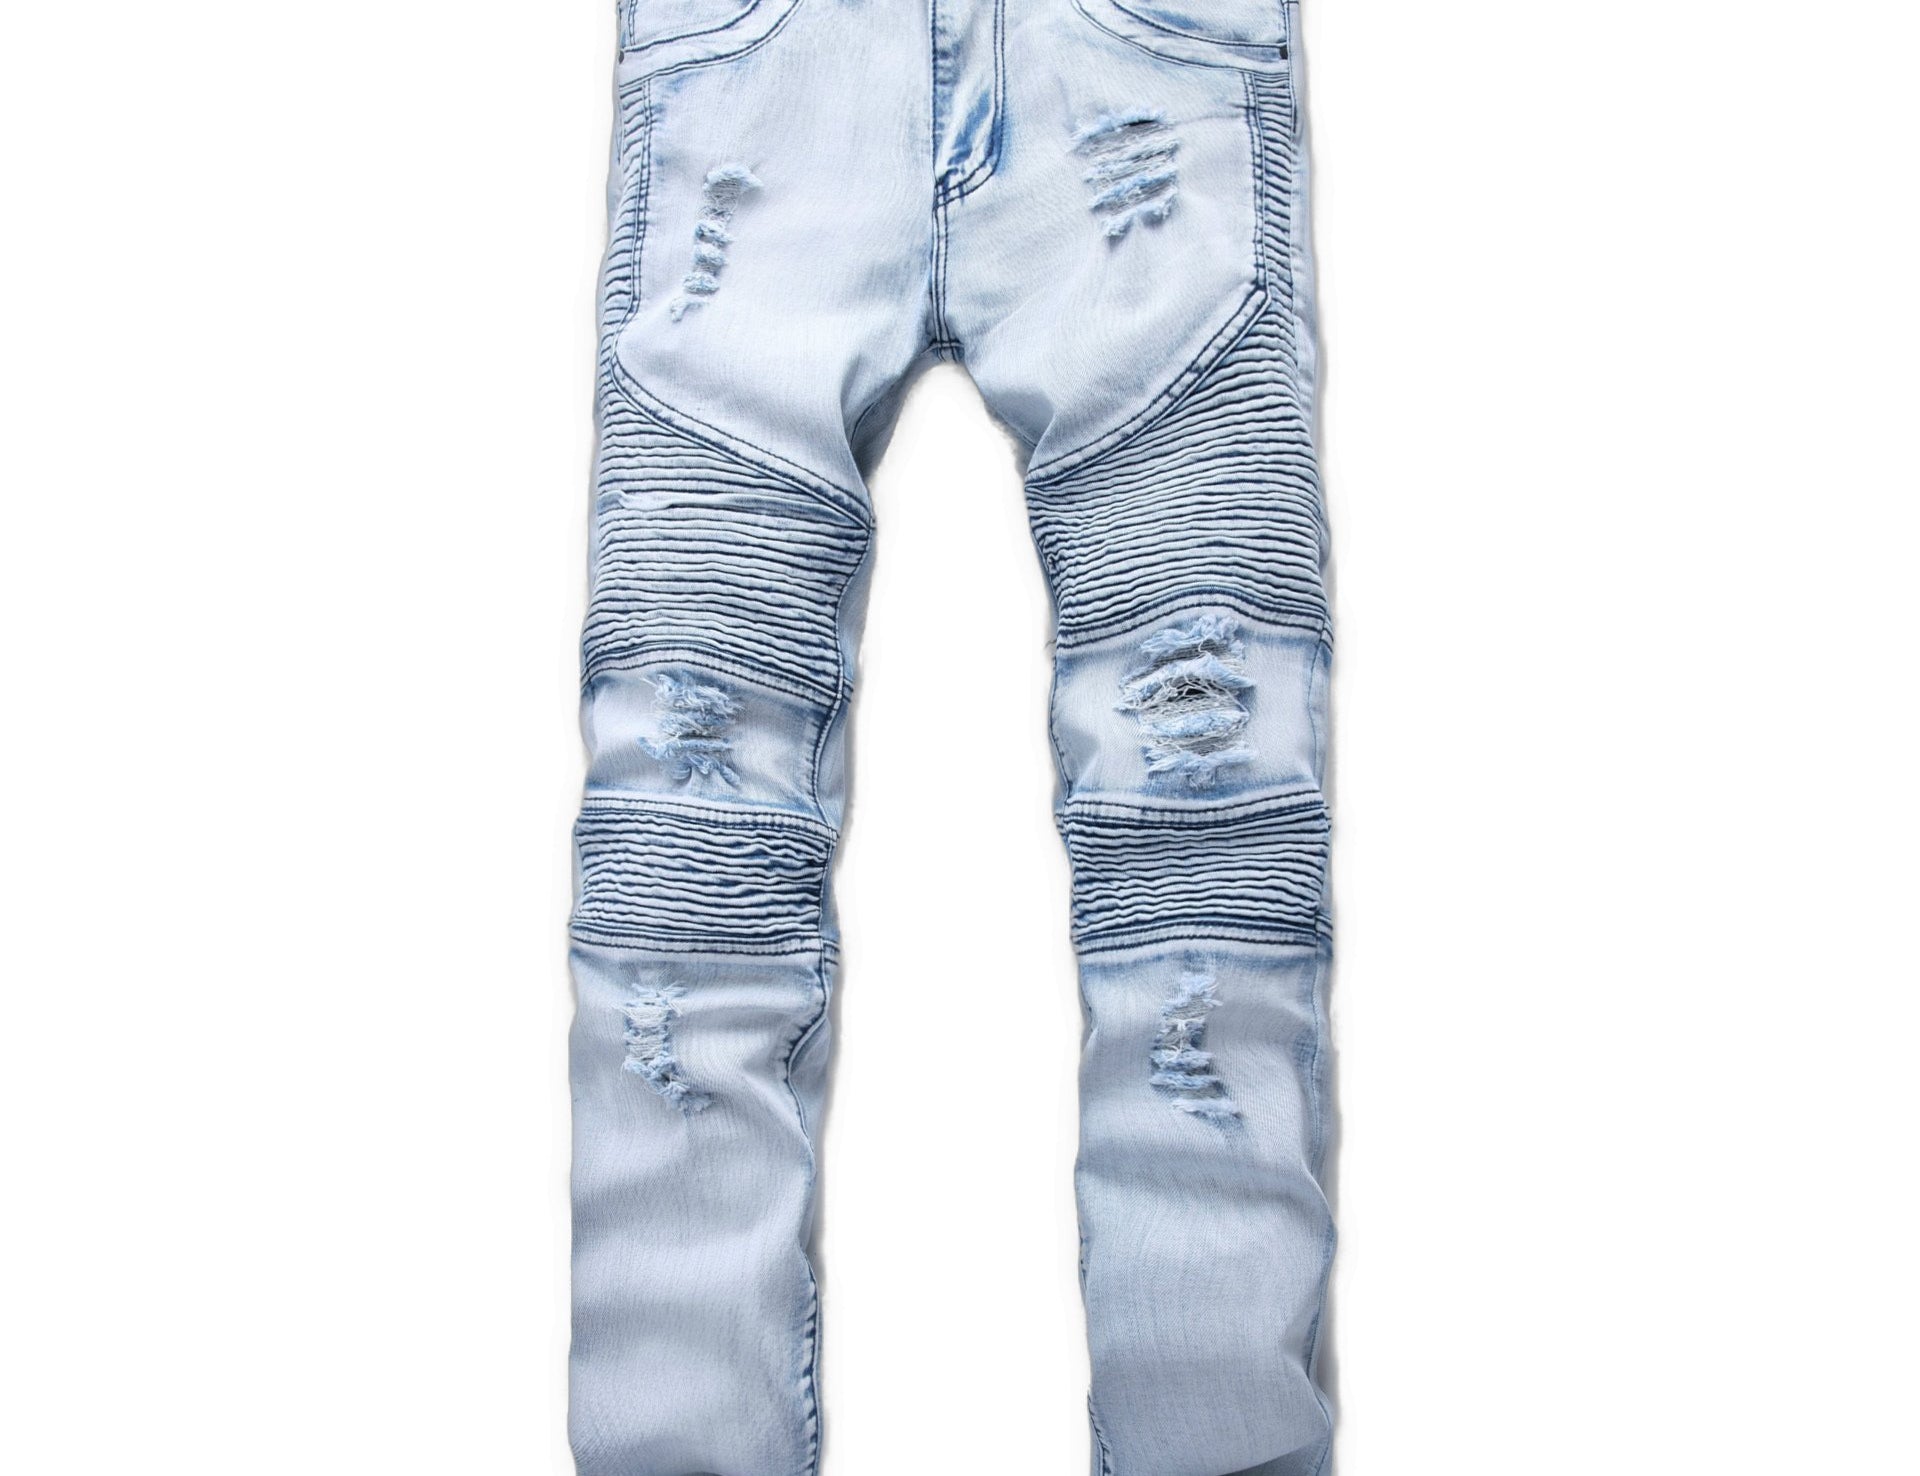 CFFT - Denim Jeans for Men - Sarman Fashion - Wholesale Clothing Fashion Brand for Men from Canada